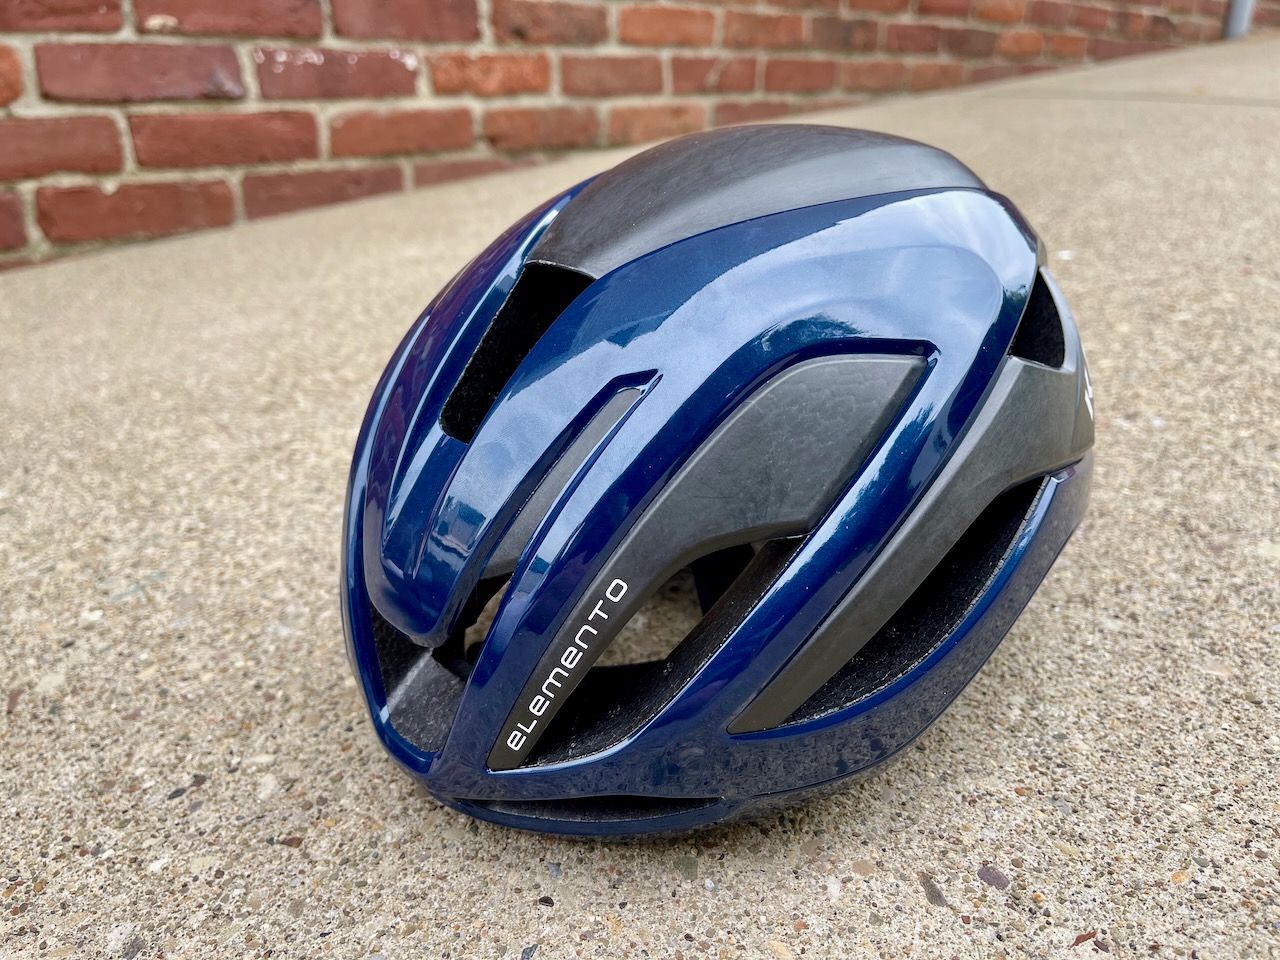 All-new KASK Elemento Aero Helmet Could Be The One For All Disciplines –  zenocycle